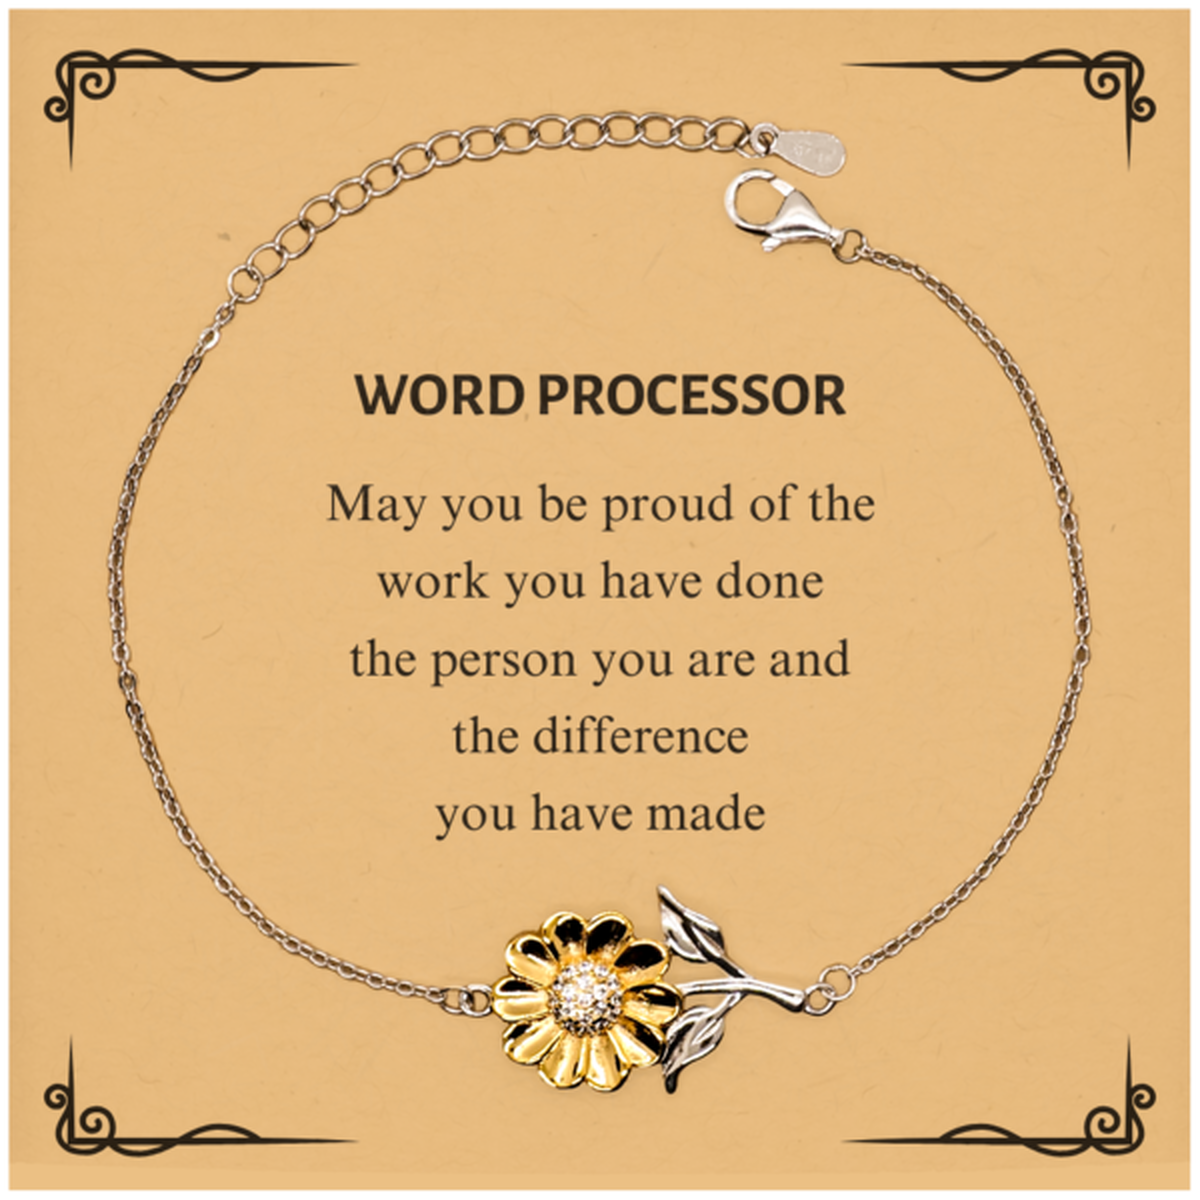 Word Processor May you be proud of the work you have done, Retirement Word Processor Sunflower Bracelet for Colleague Appreciation Gifts Amazing for Word Processor